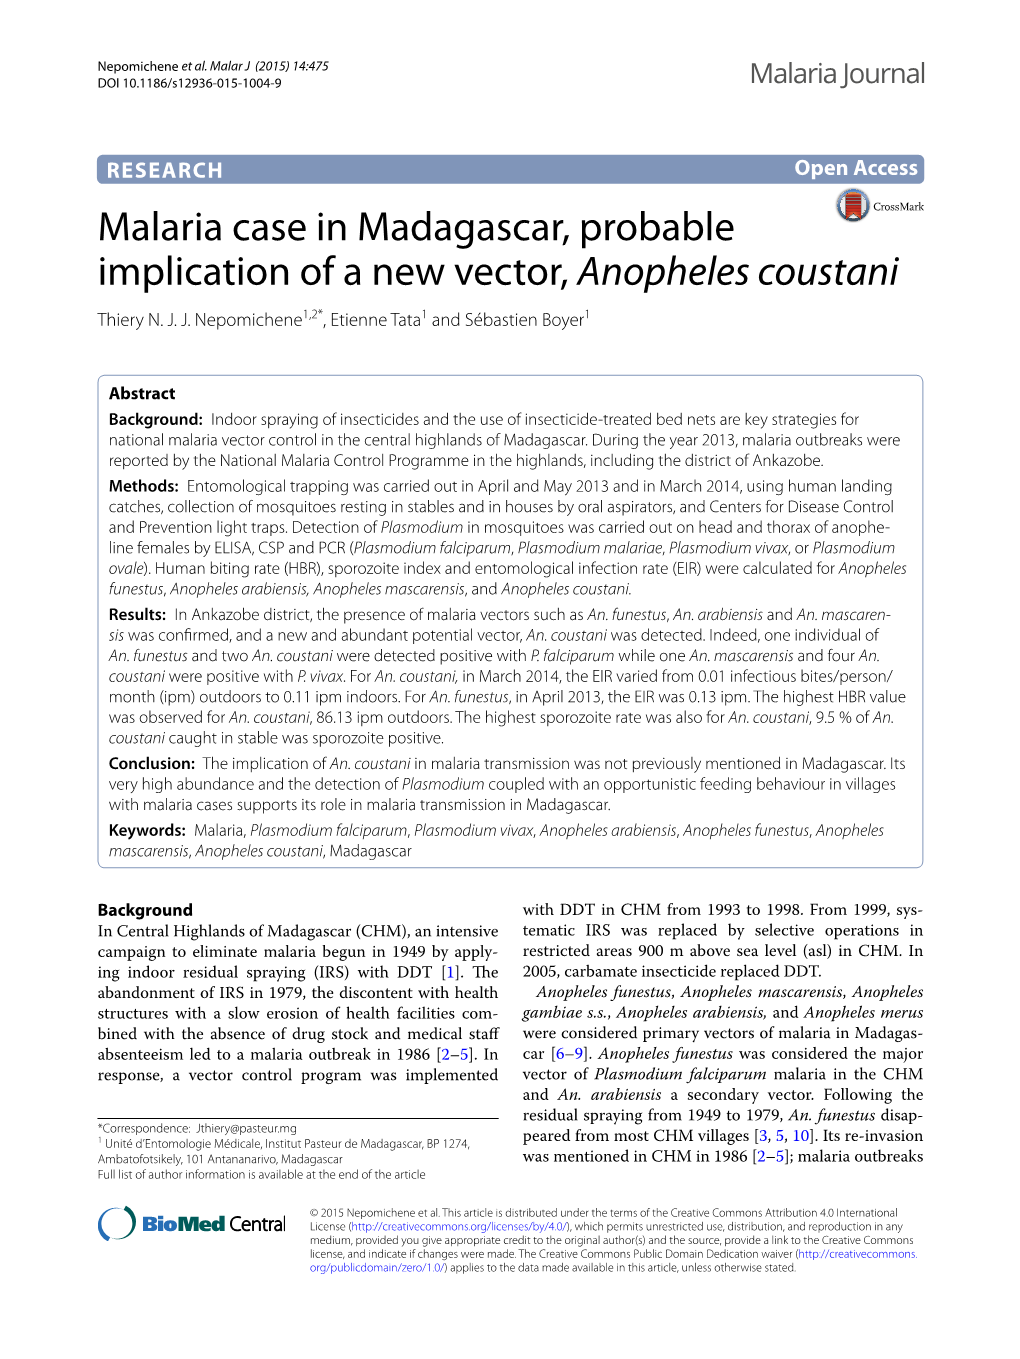 Malaria Case in Madagascar, Probable Implication of a New Vector, Anopheles Coustani Thiery N